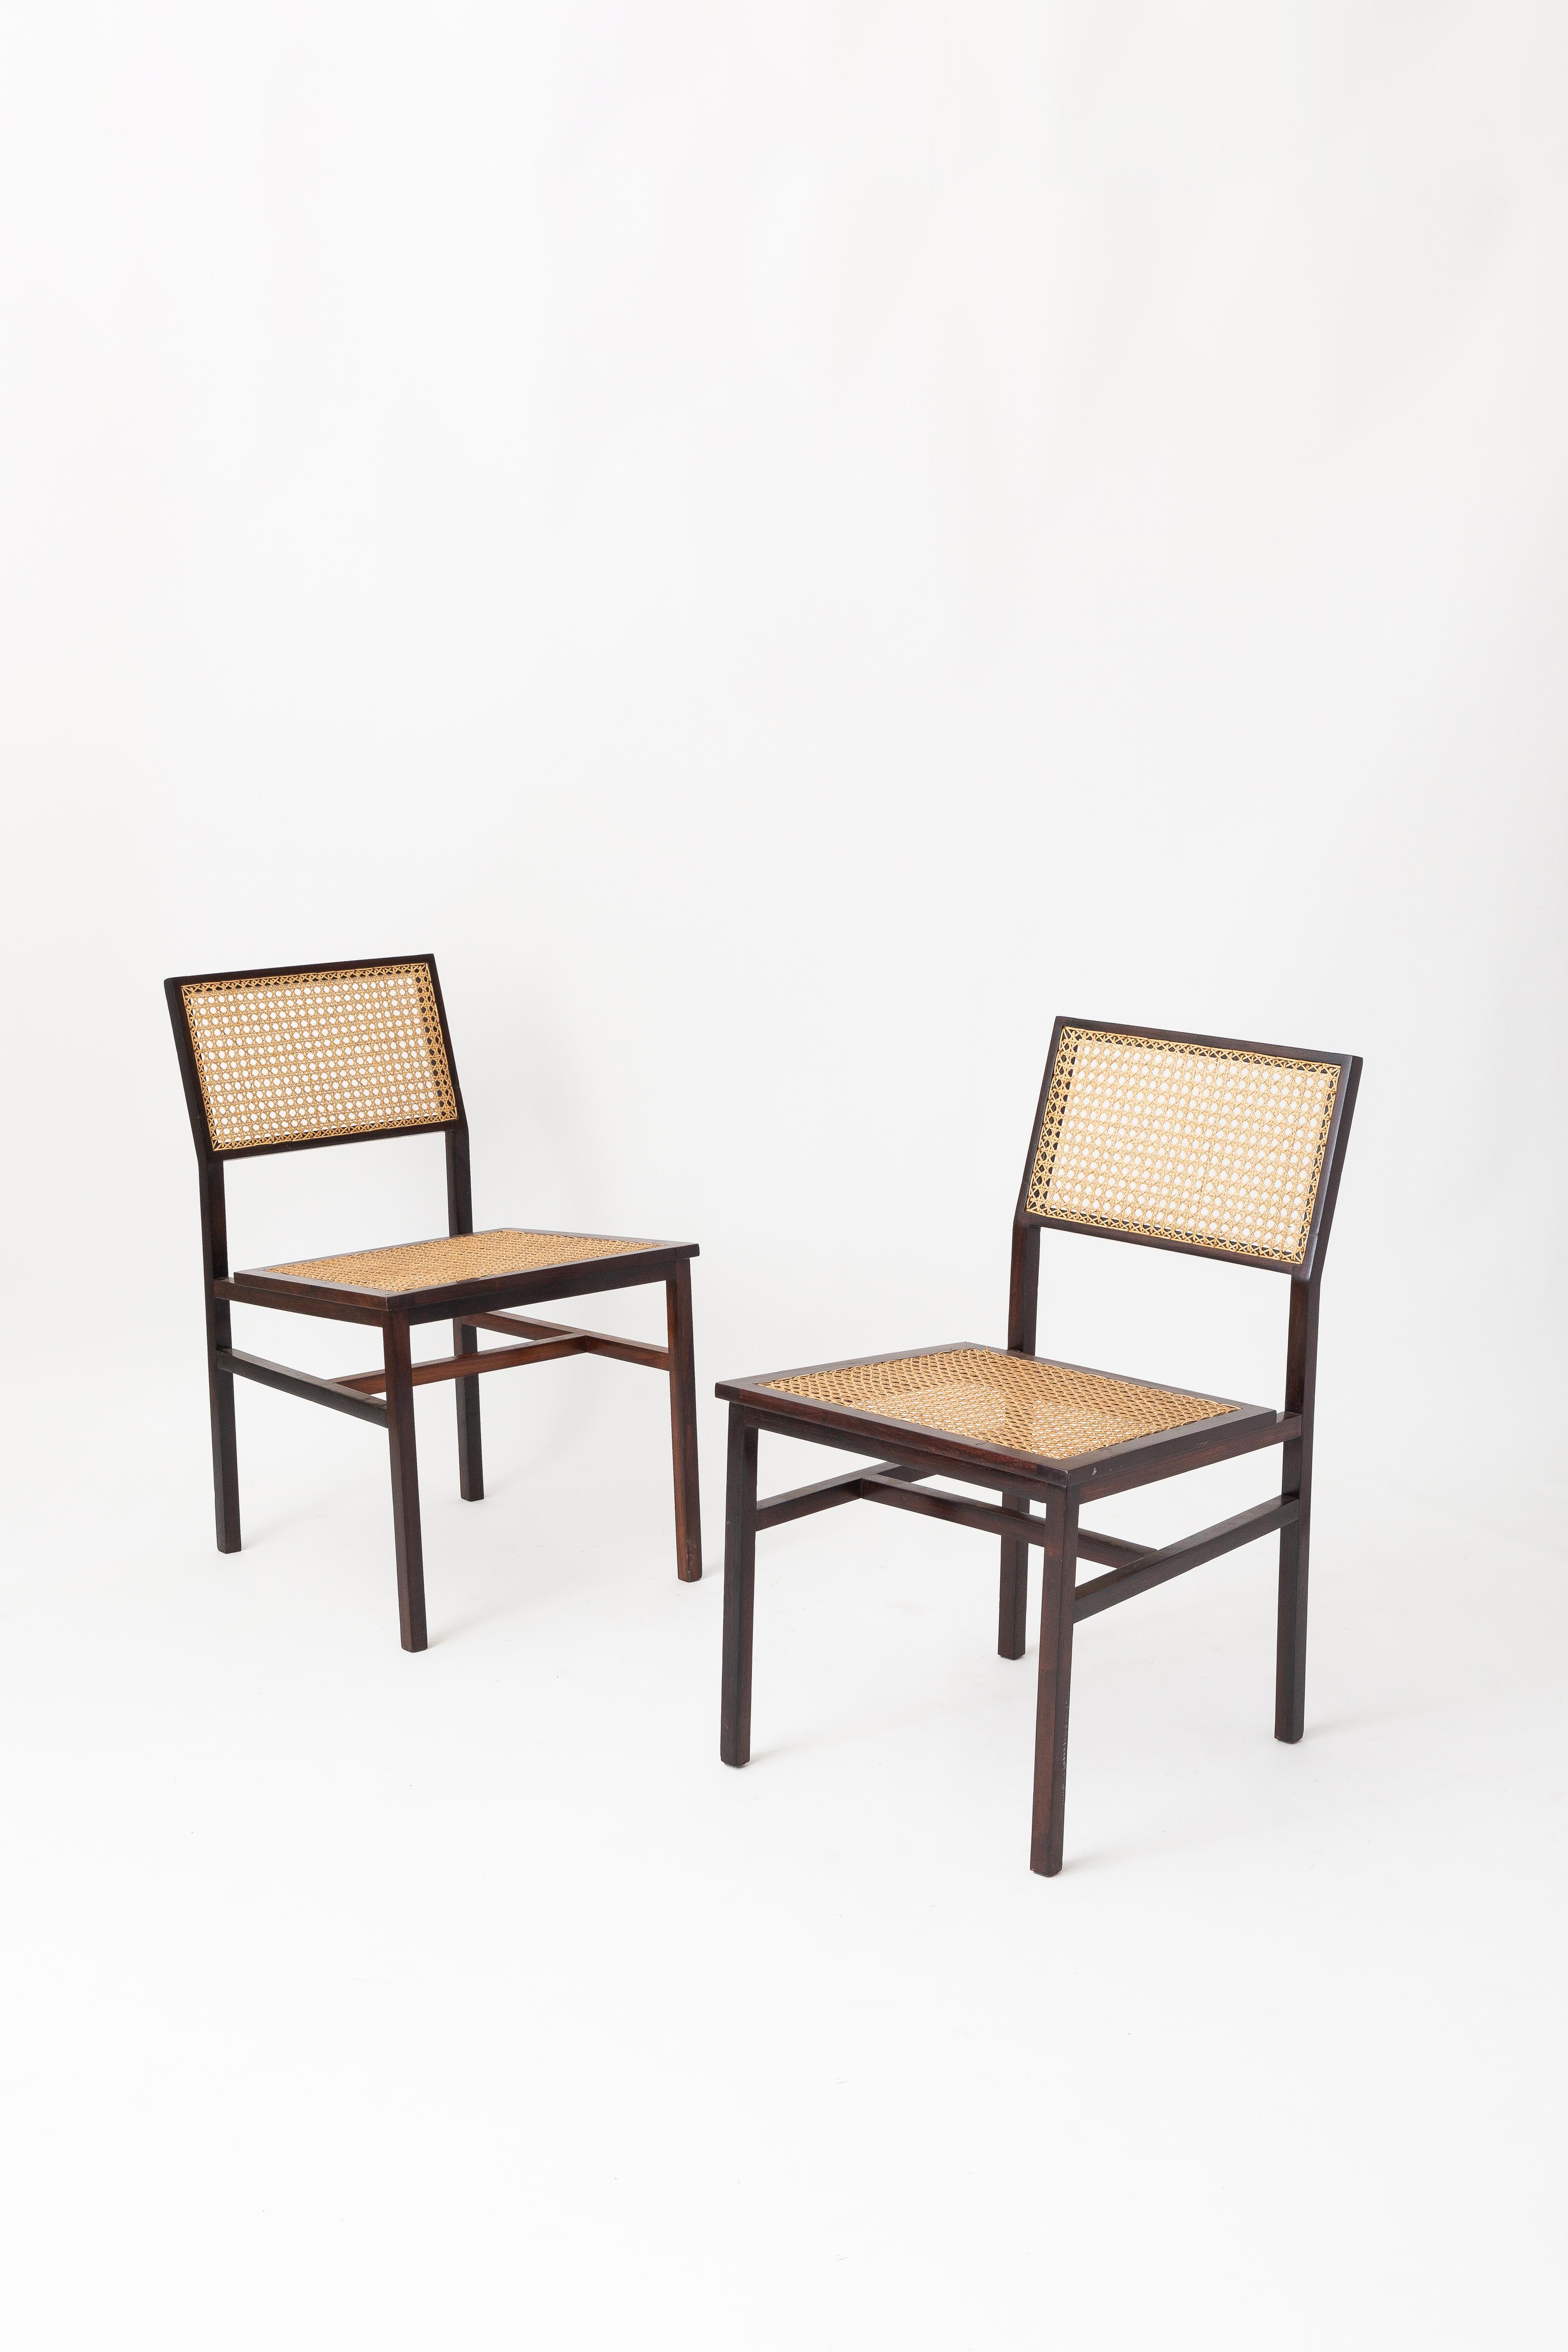 20th Century Tenreiro pair of wood and cane chairs (with original label) For Sale